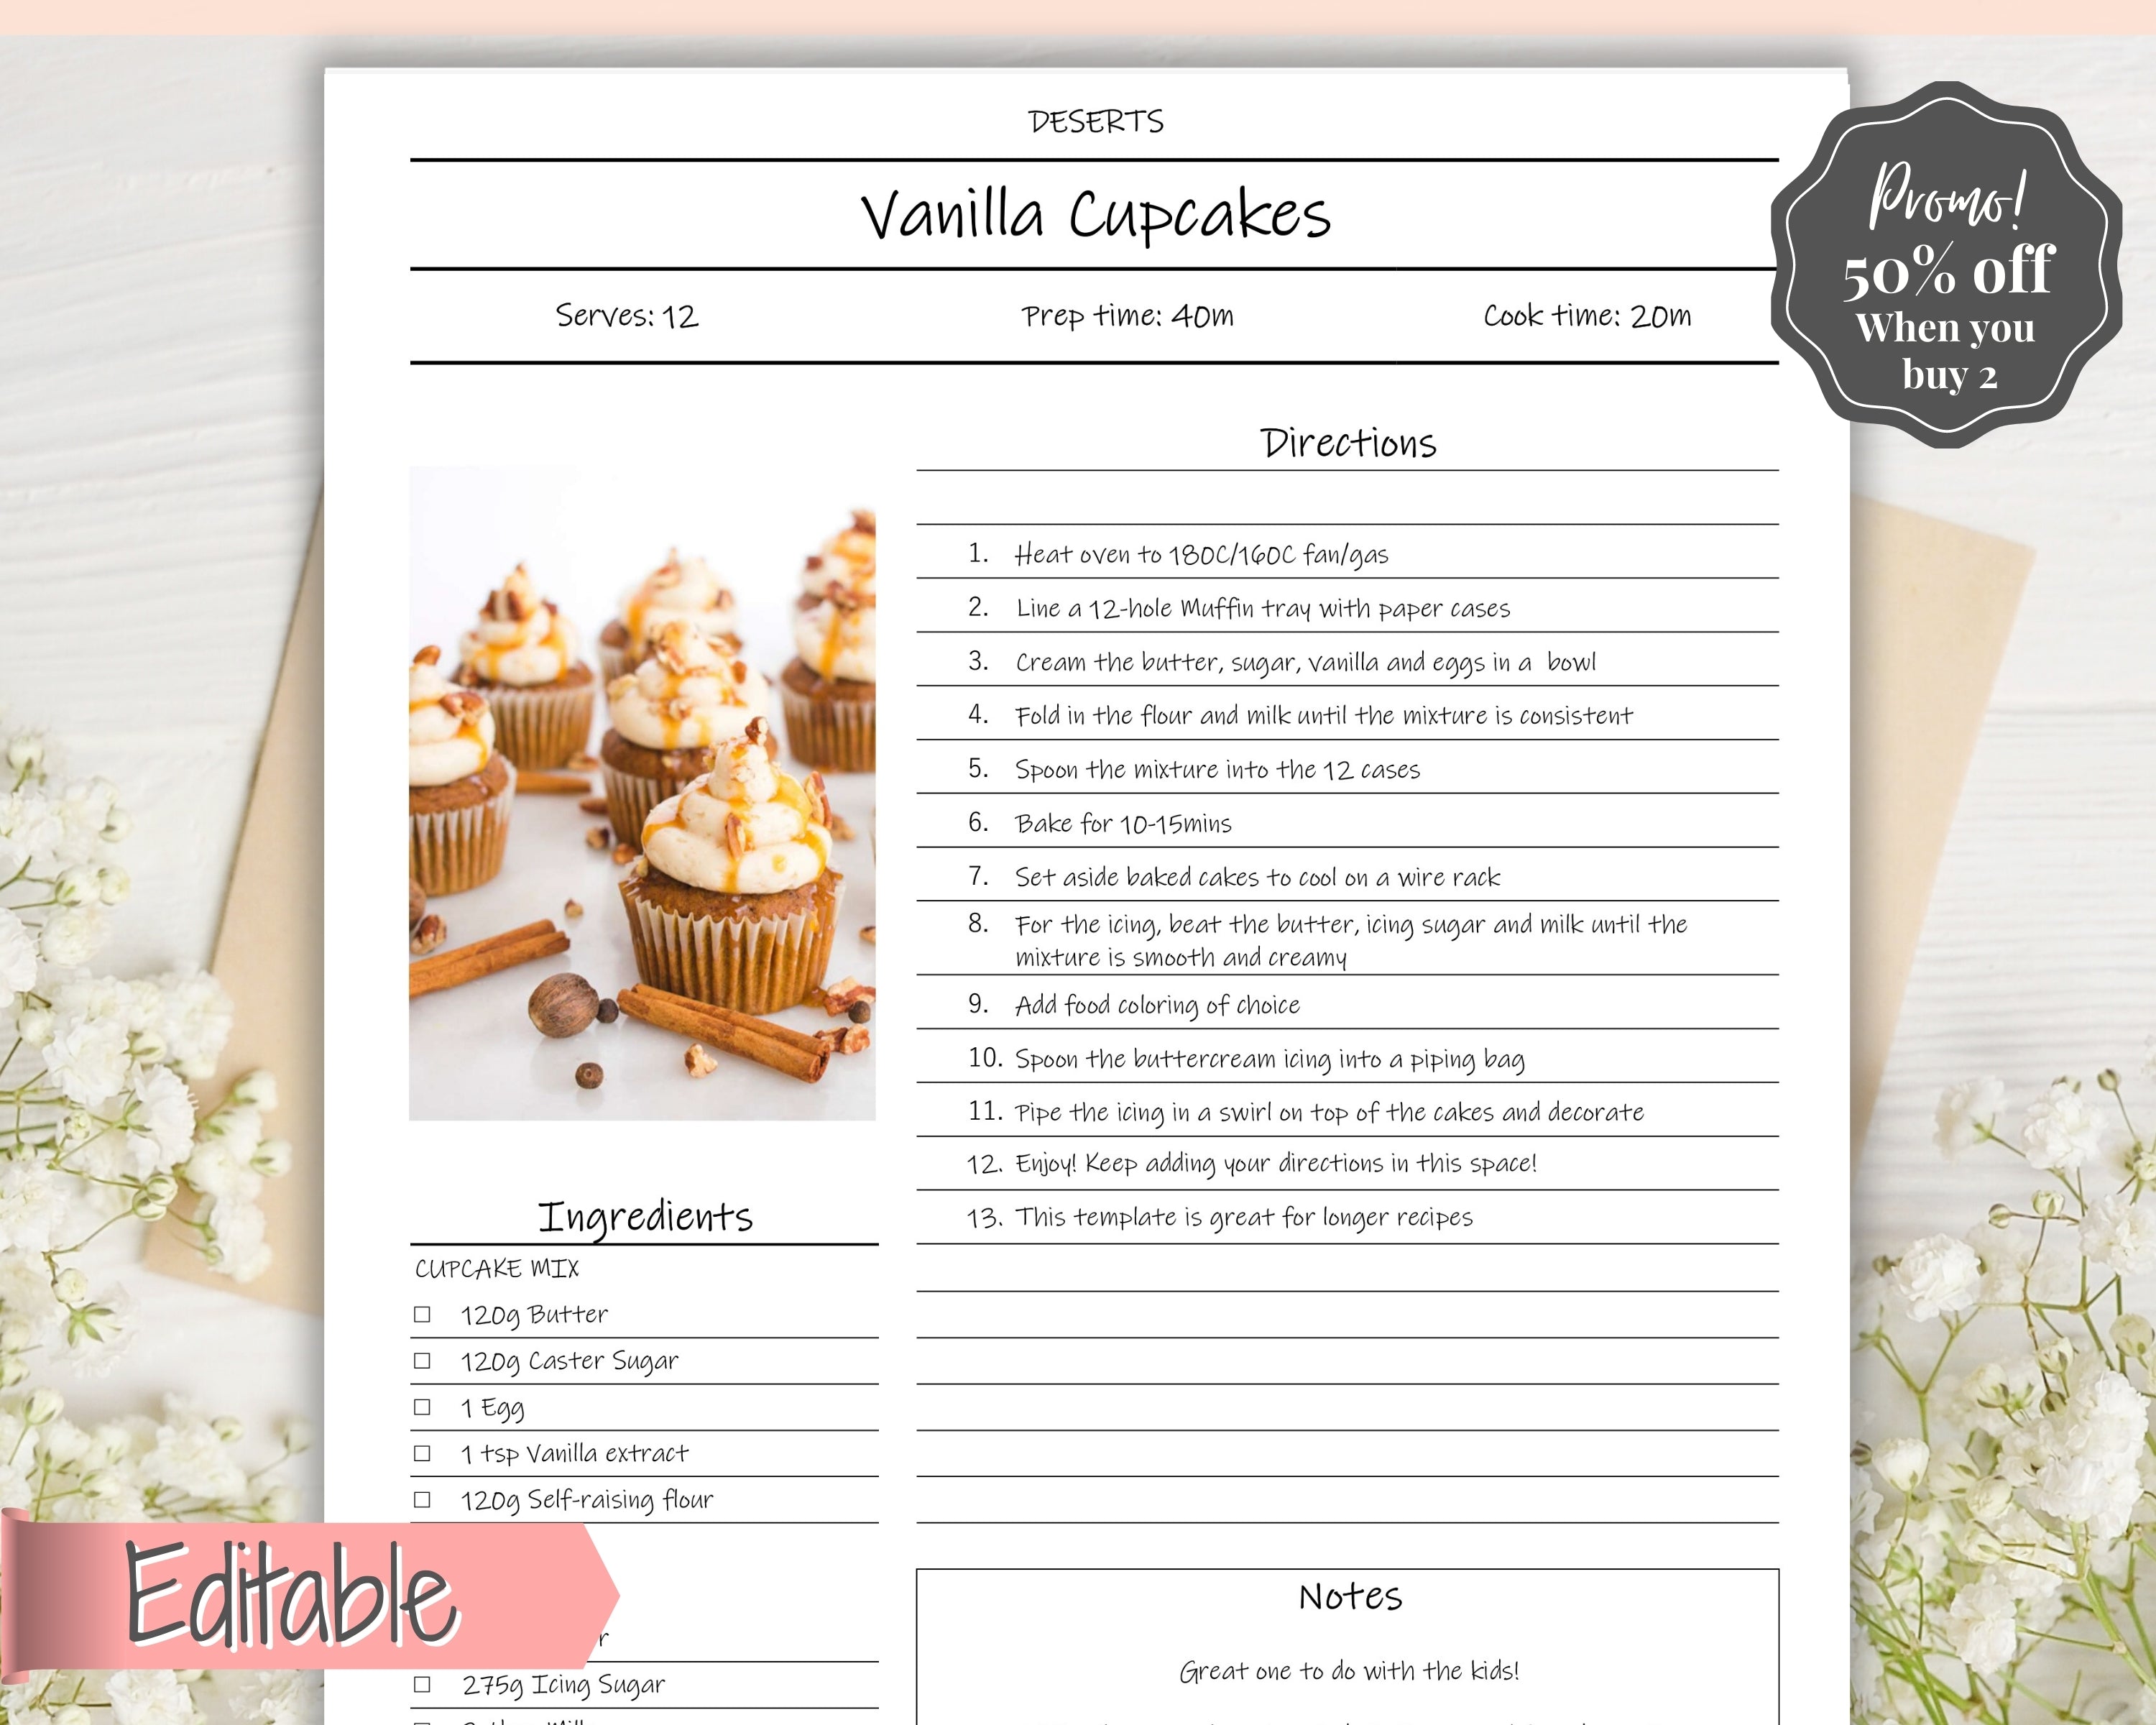 Recipe Sheet Printable Recipe Page Template Blank (Instant